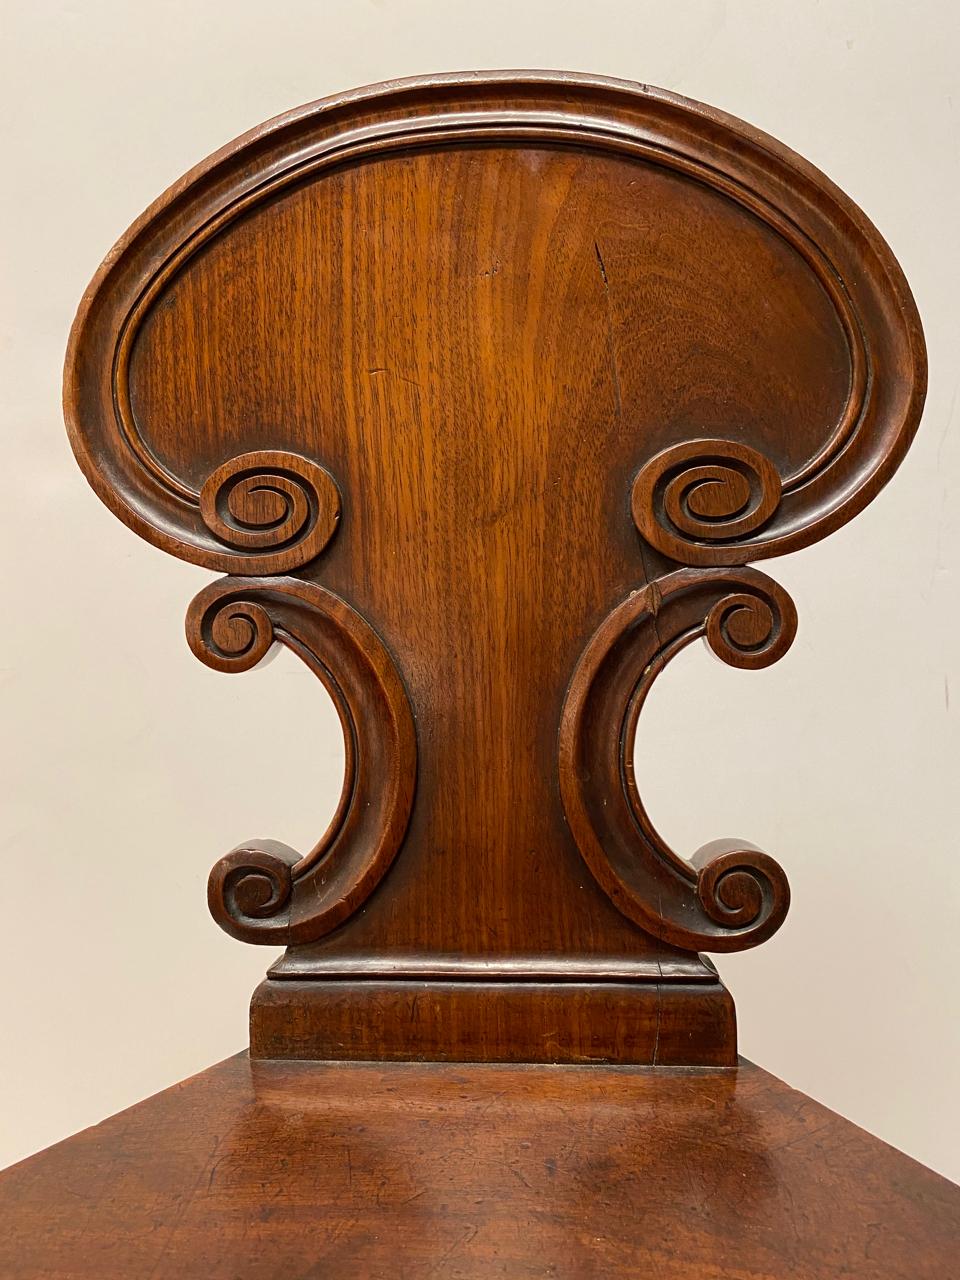 This is a small beautifully crafted English solid mahogany hall chair. The chair dates to the late 19th century and is in overall very good condition.